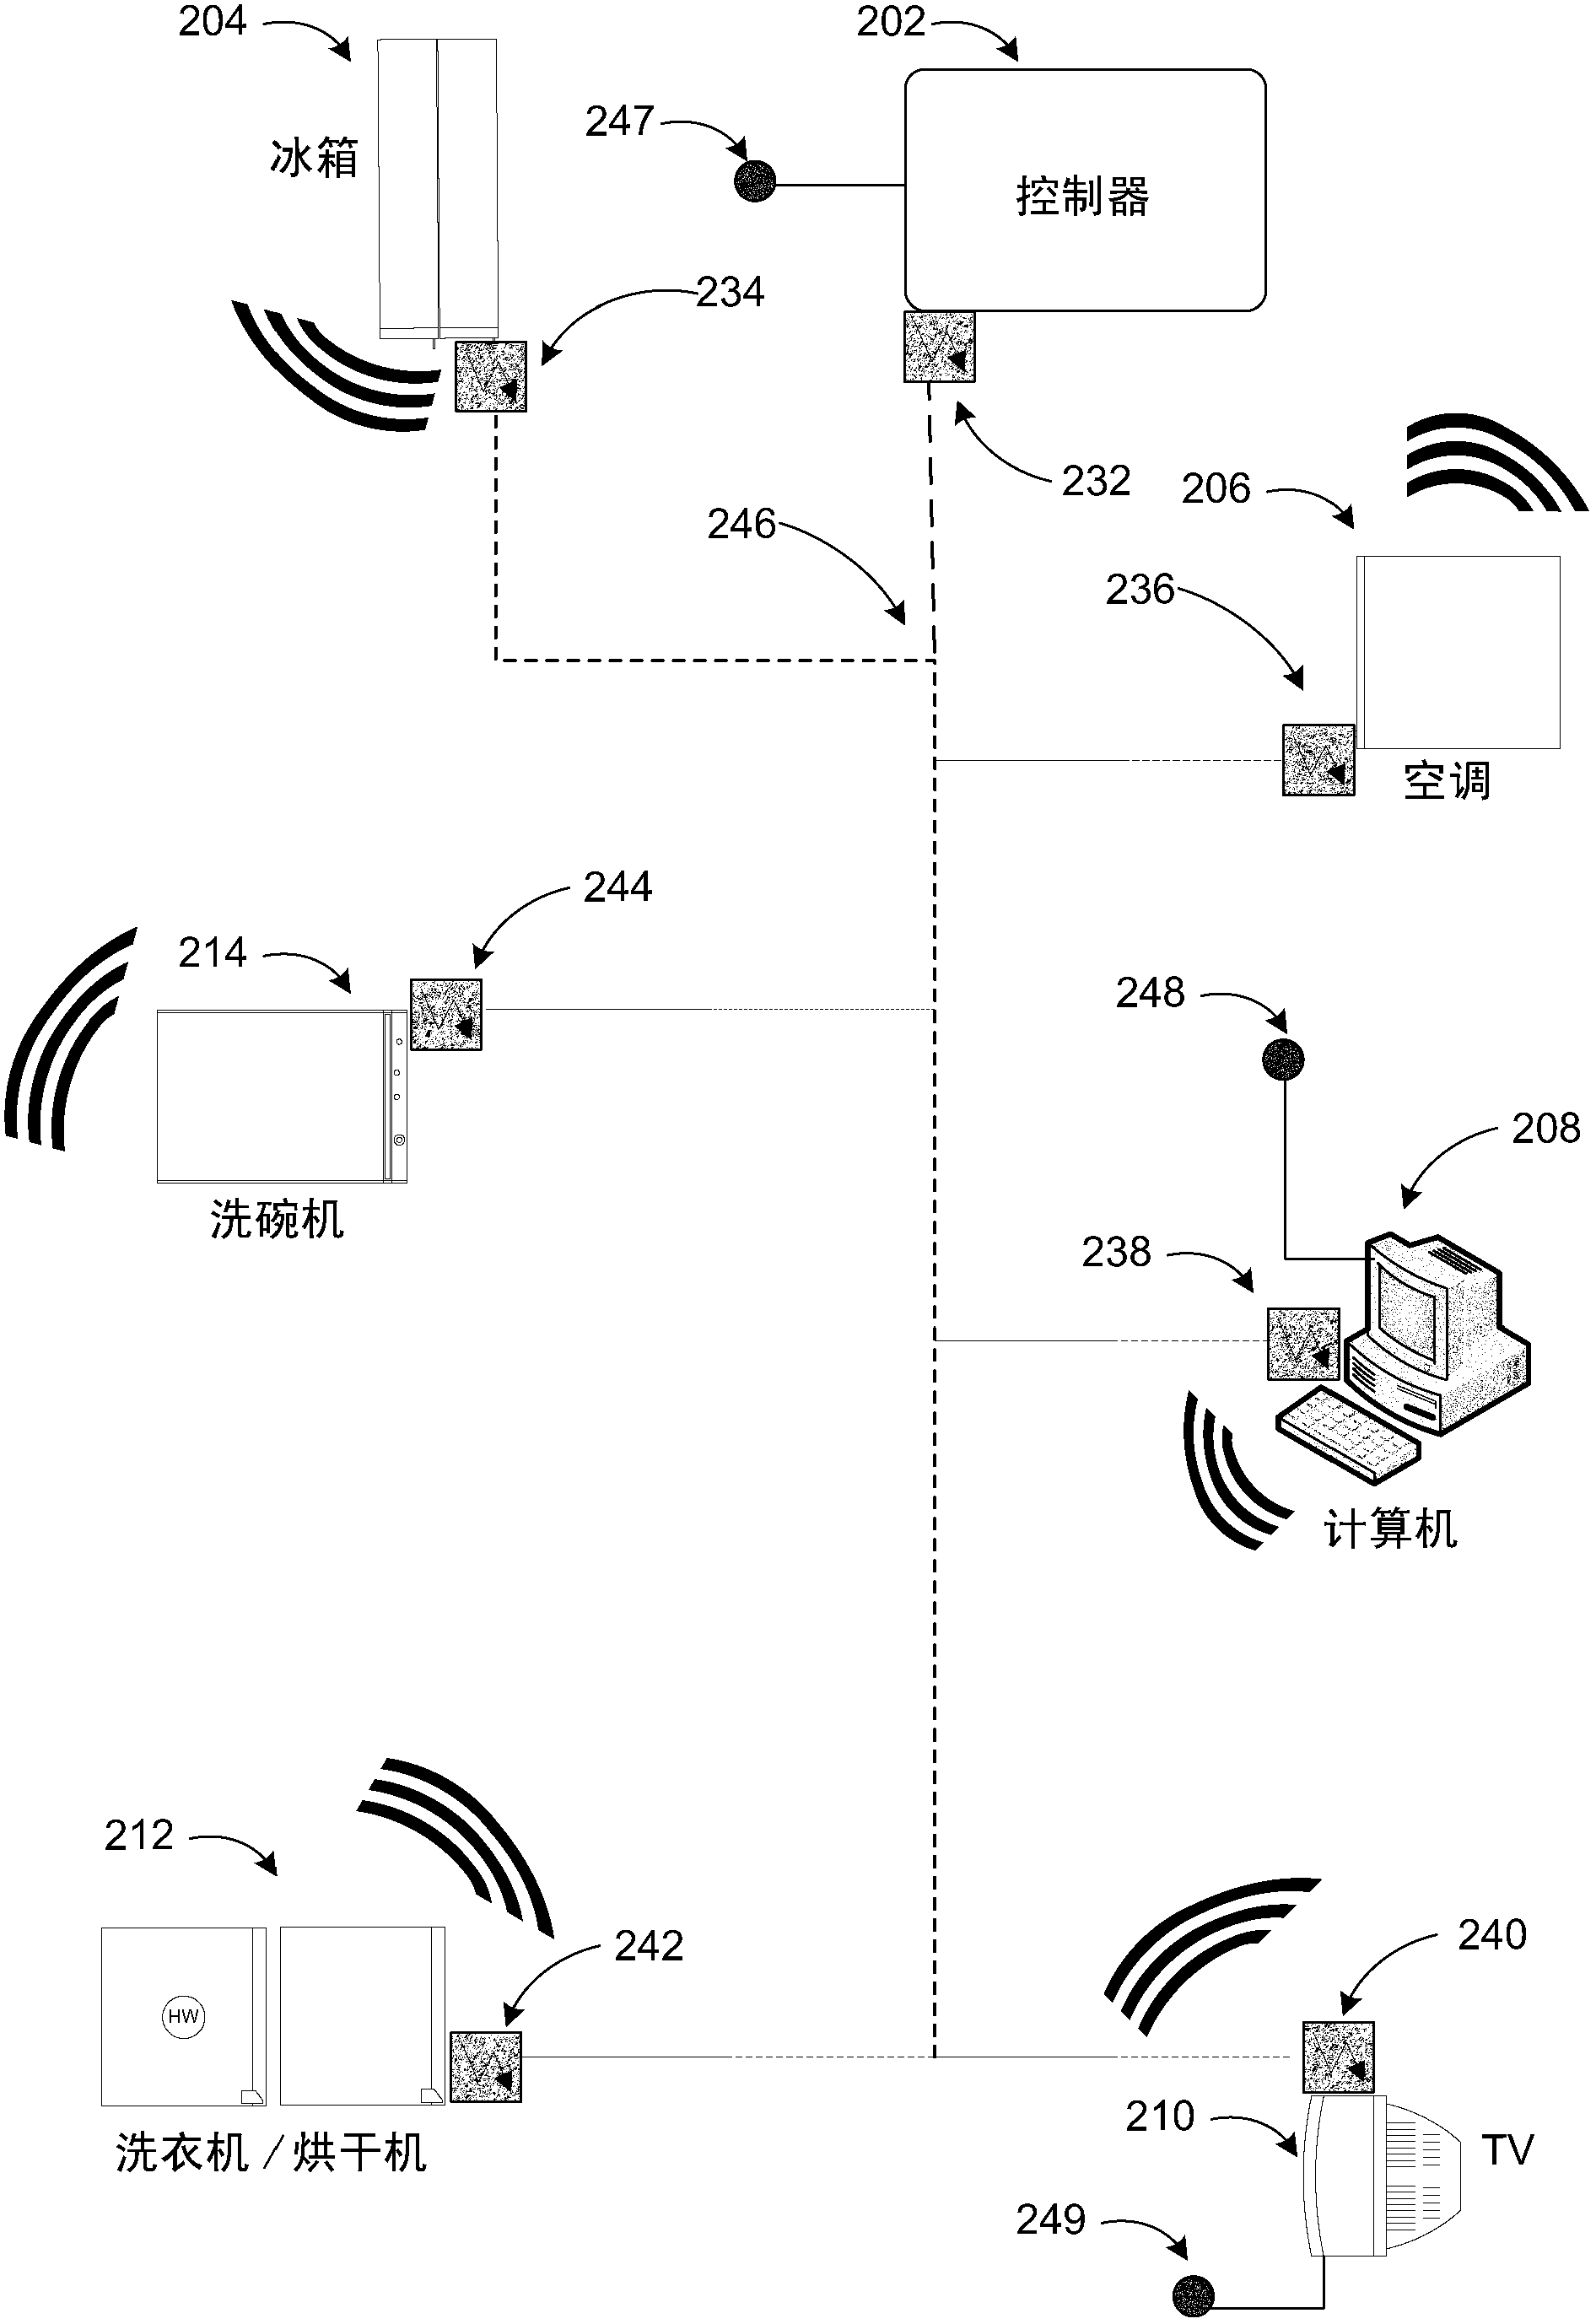 Acoustic noise management through control of electrical device operations